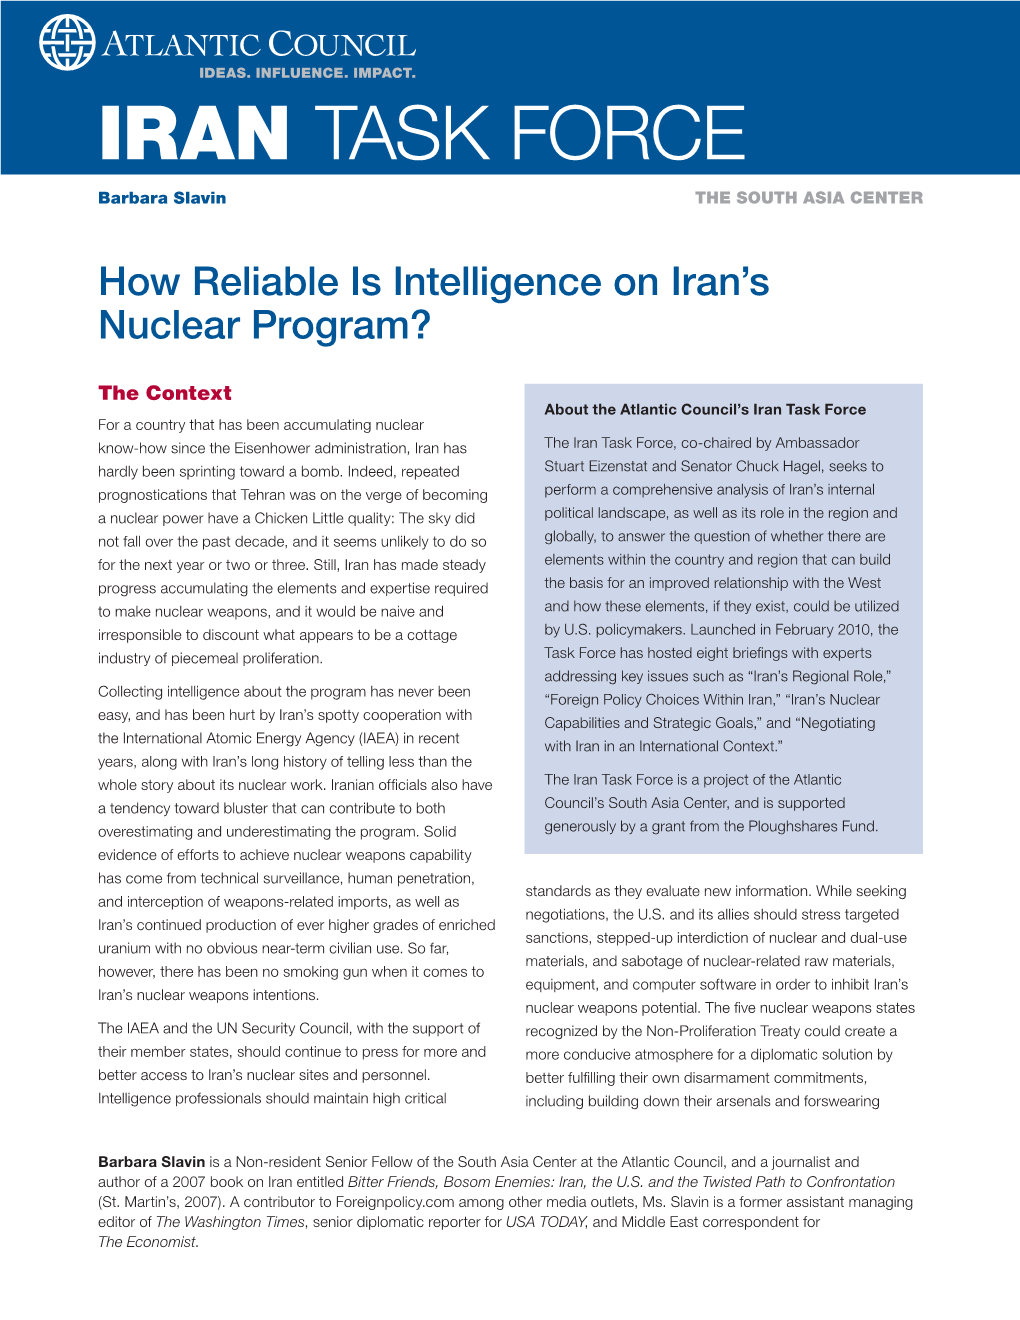 How Reliable Is Intelligence on Iran's Nuclear Program?